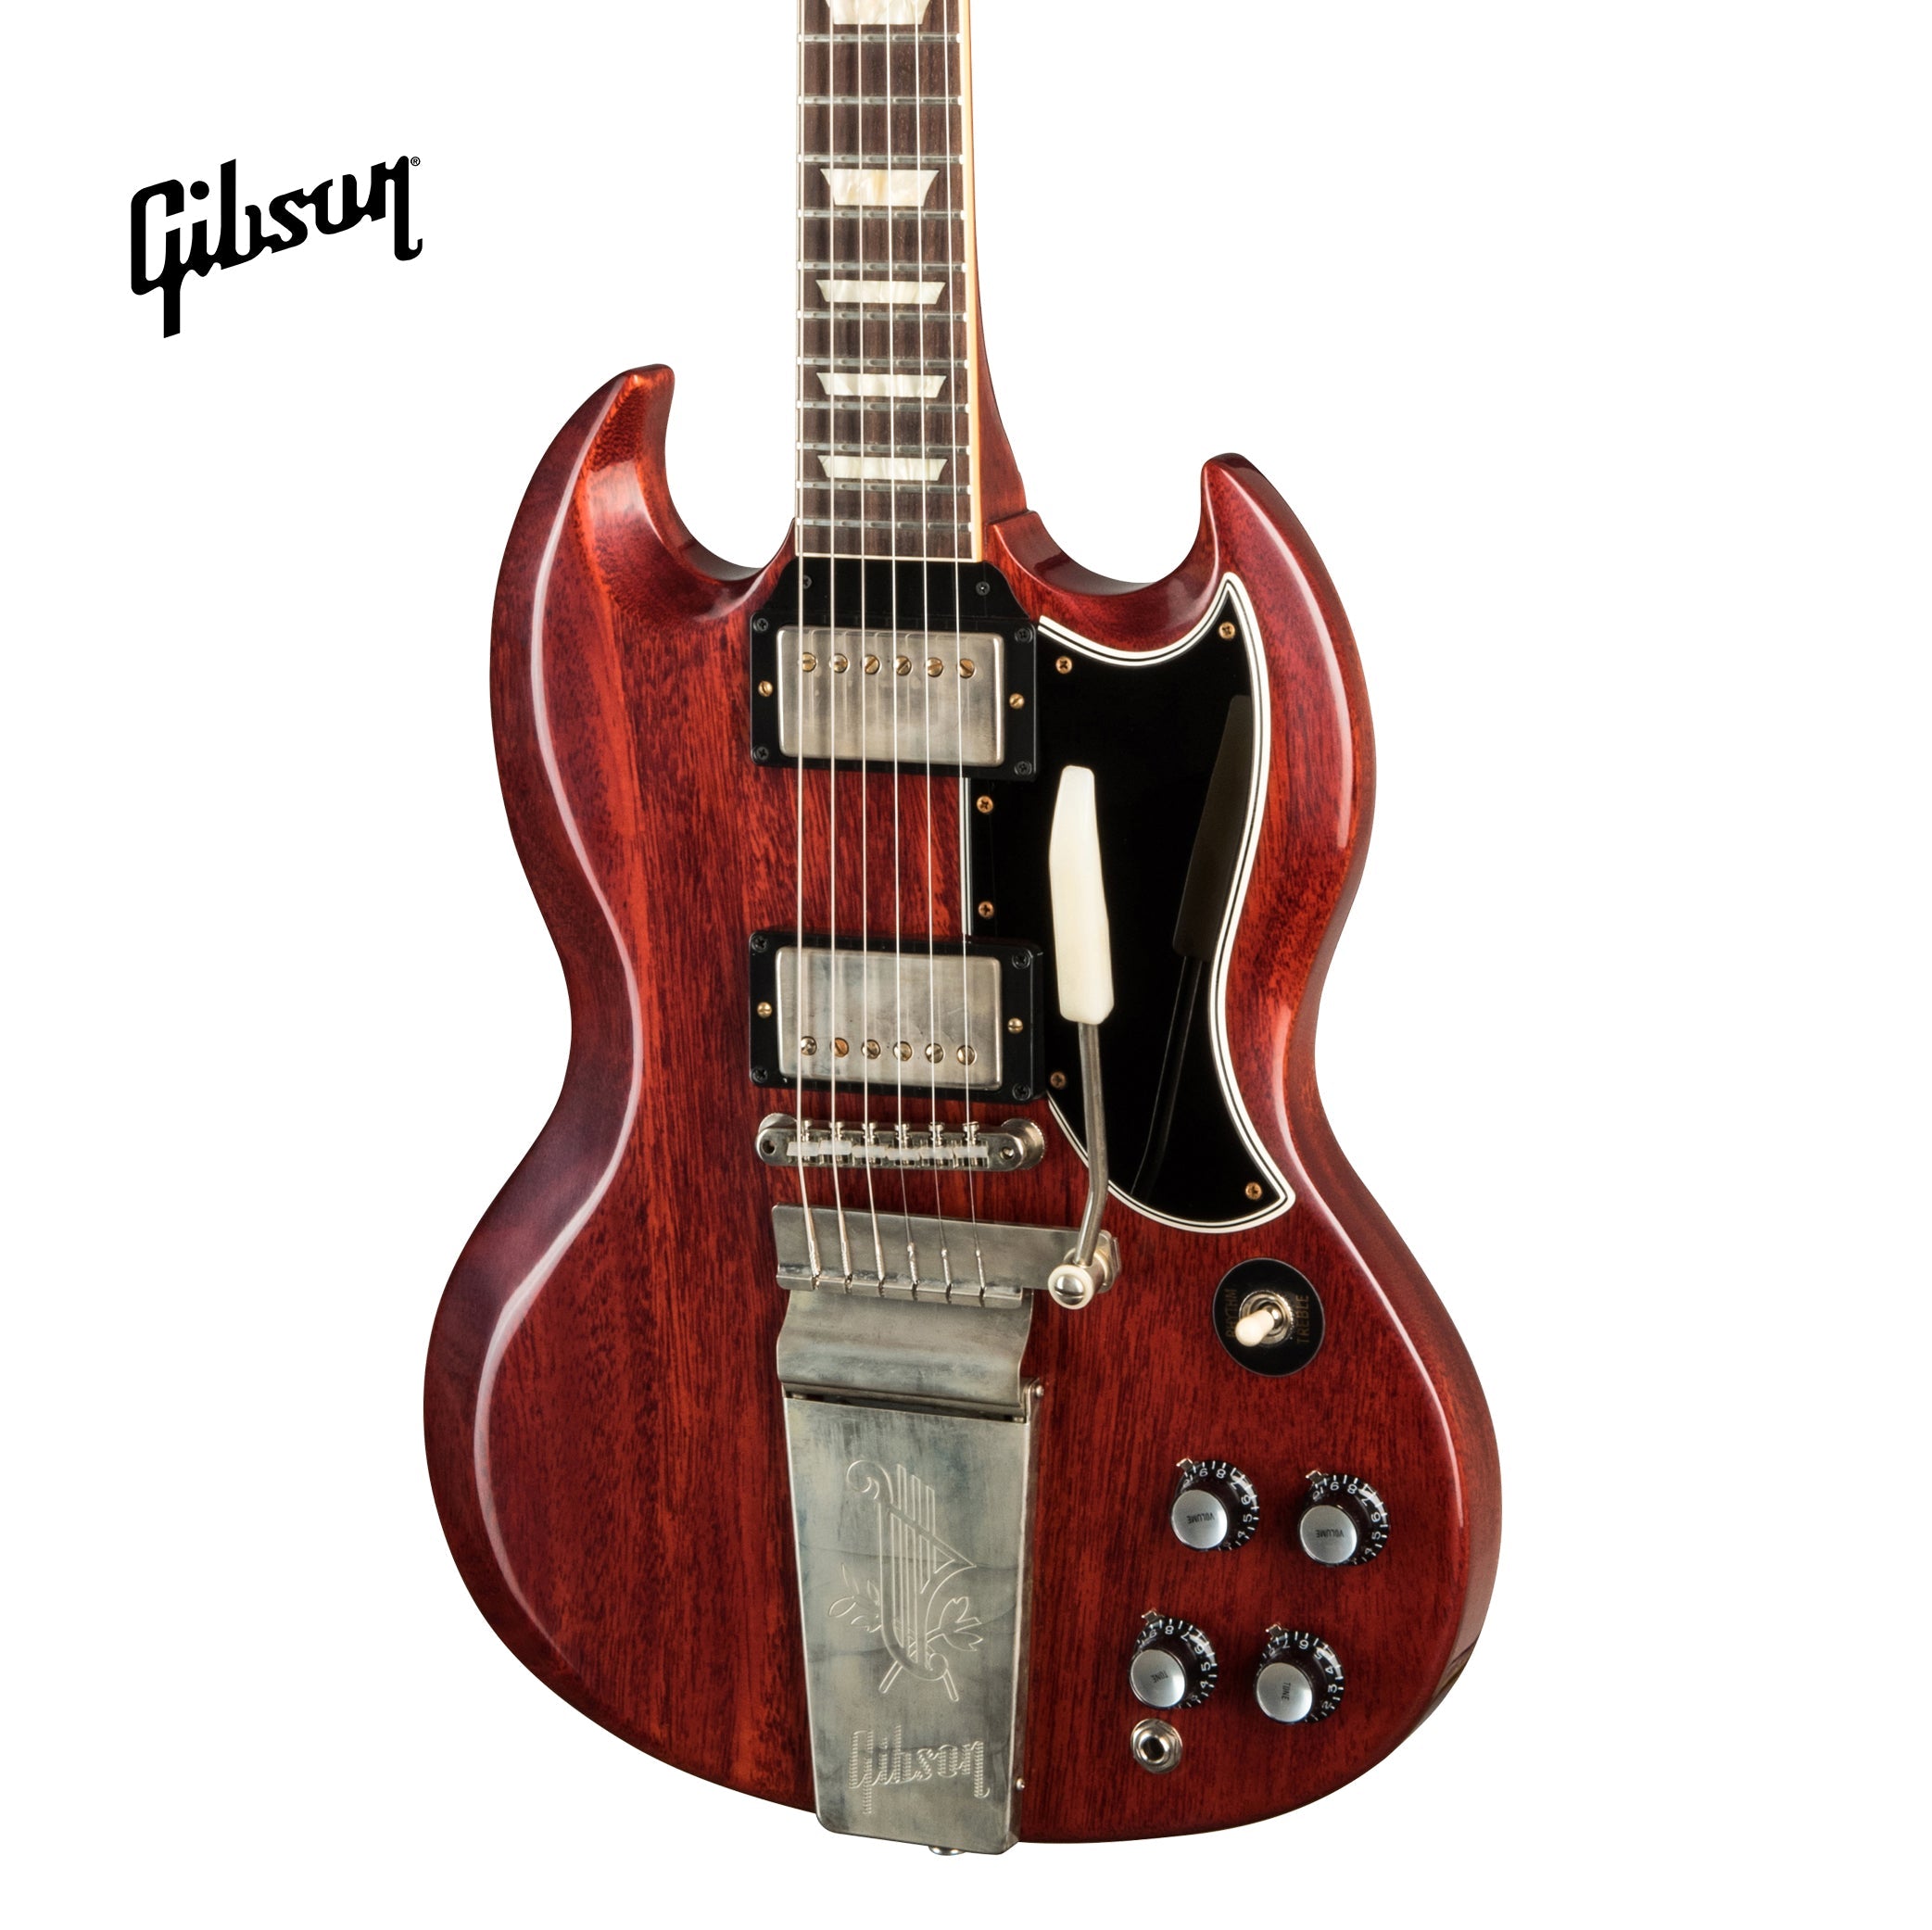 GIBSON 1964 SG STANDARD REISSUE WITH MAESTRO VIBROLA VOS ELECTRIC GUITAR - CHERRY RED